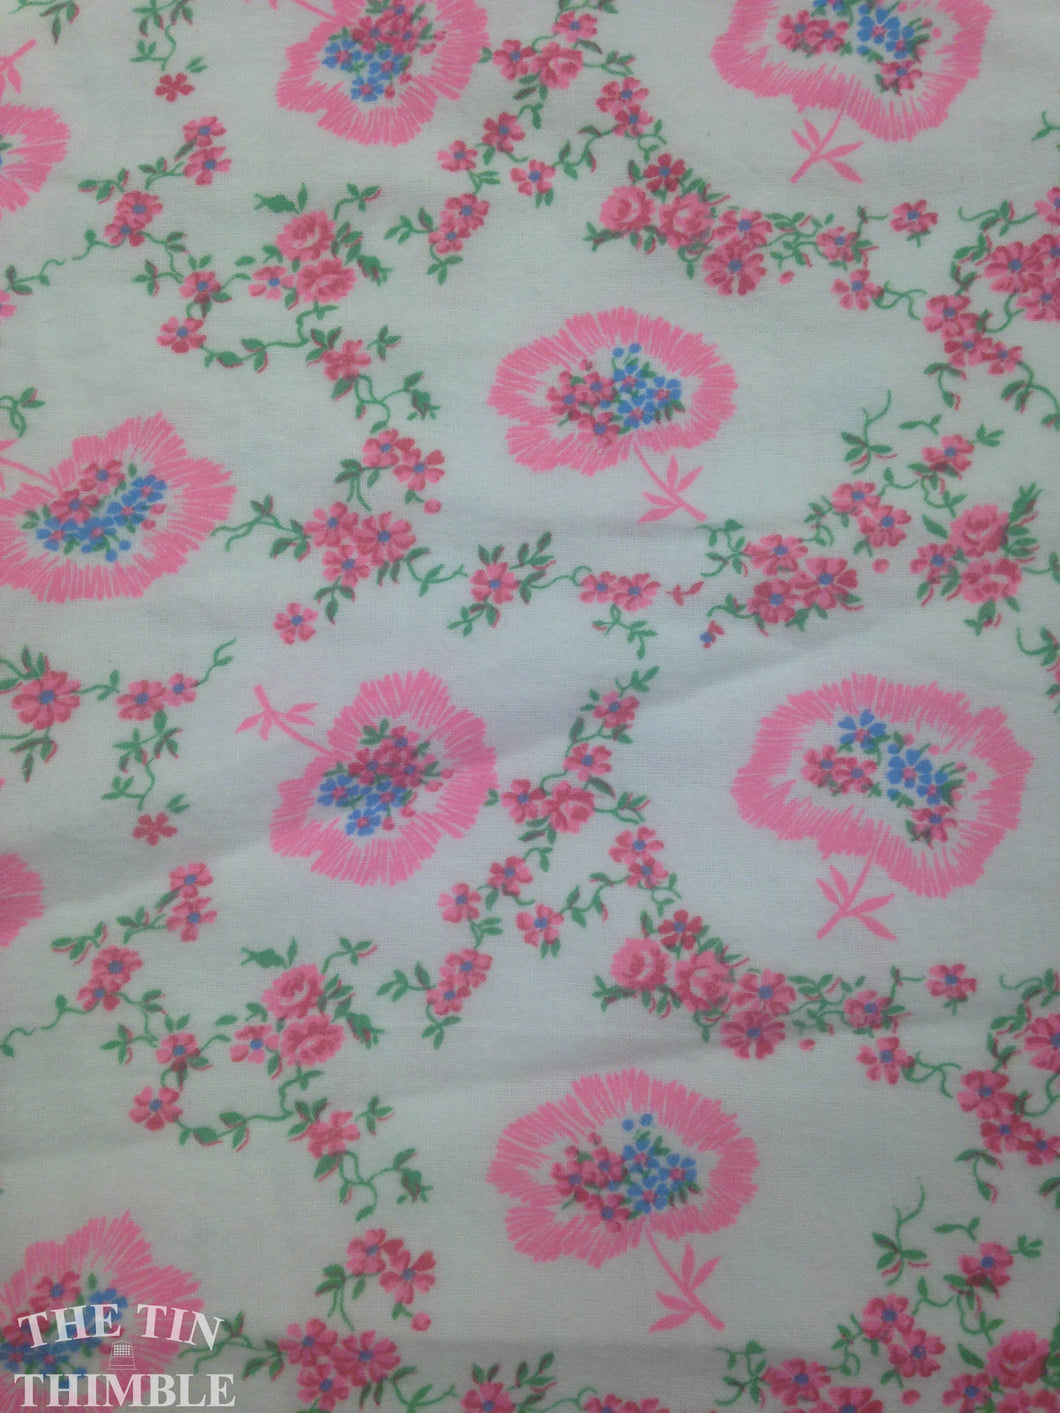 Flannel Vintage Fabric with a Pink, White, Blue and Red Floral Print - 1 Yard - 100% Cotton Flannel